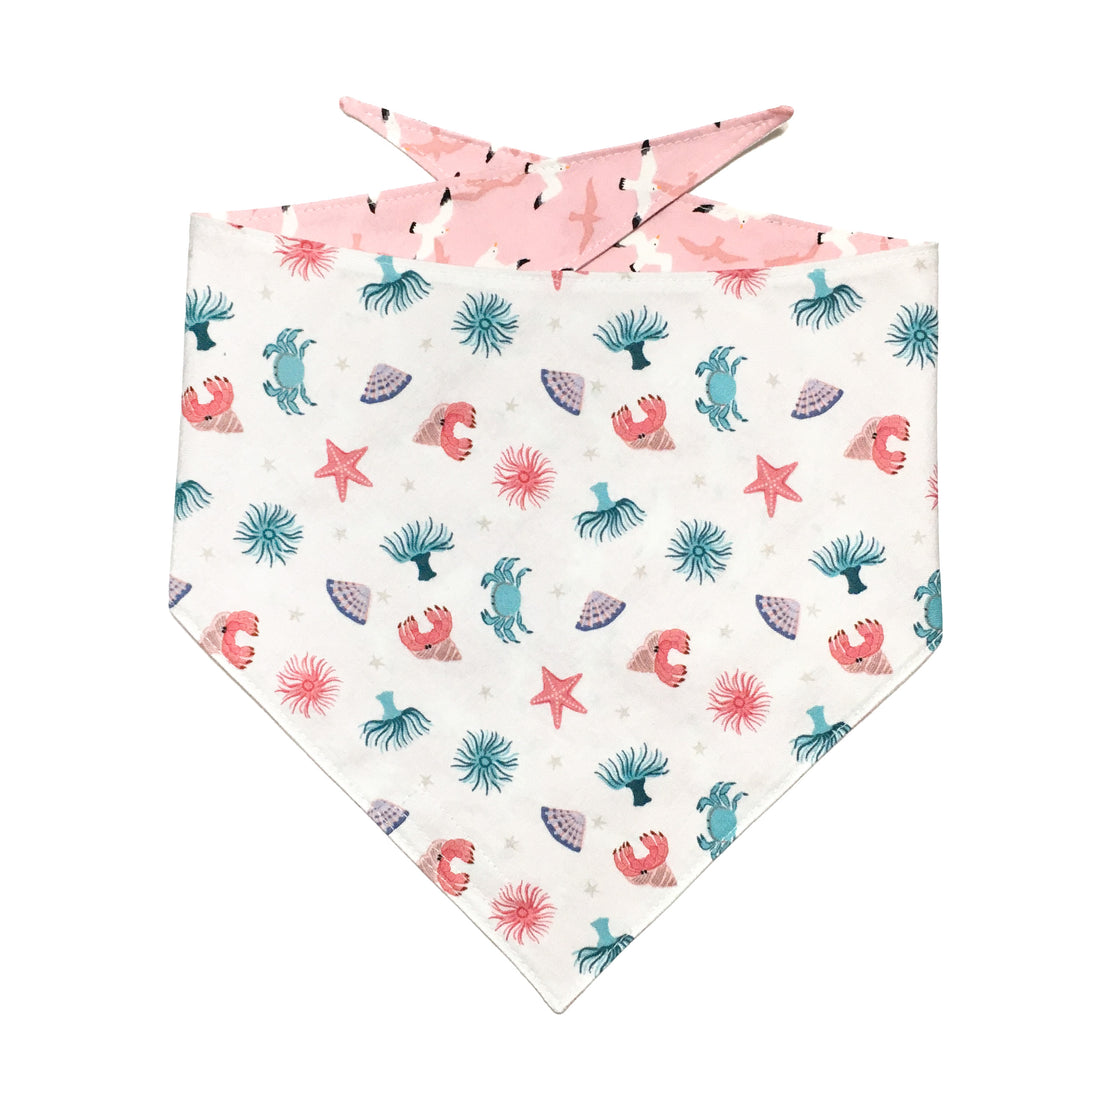 Persnickety Pets: seagulls and sand critters reversible bandana, back